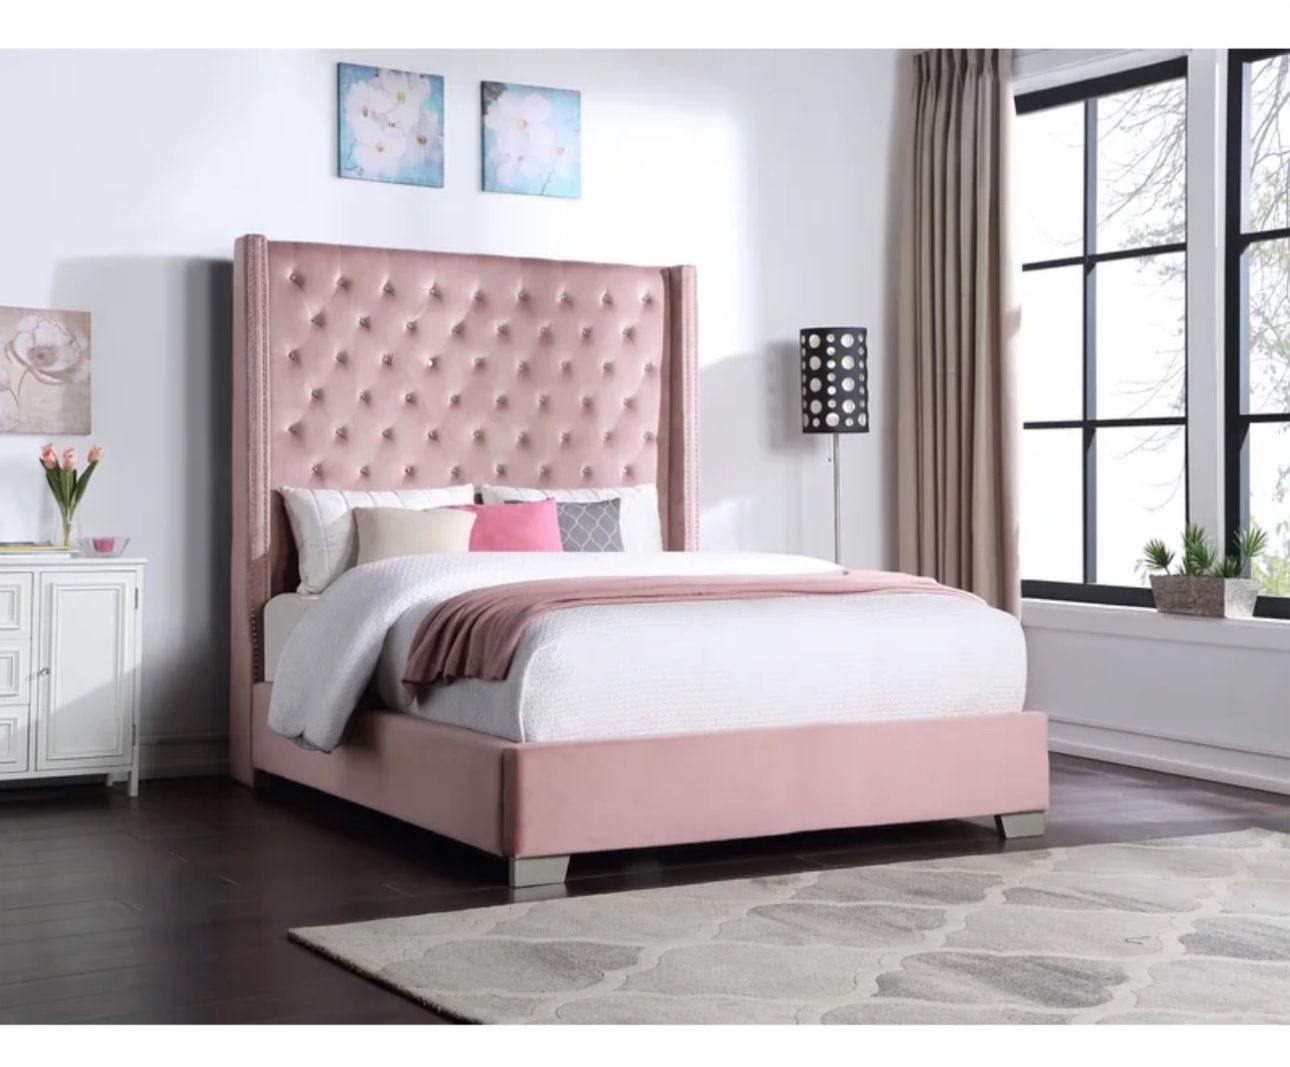 Queen Dshae Upholstered Standard Bed Pink